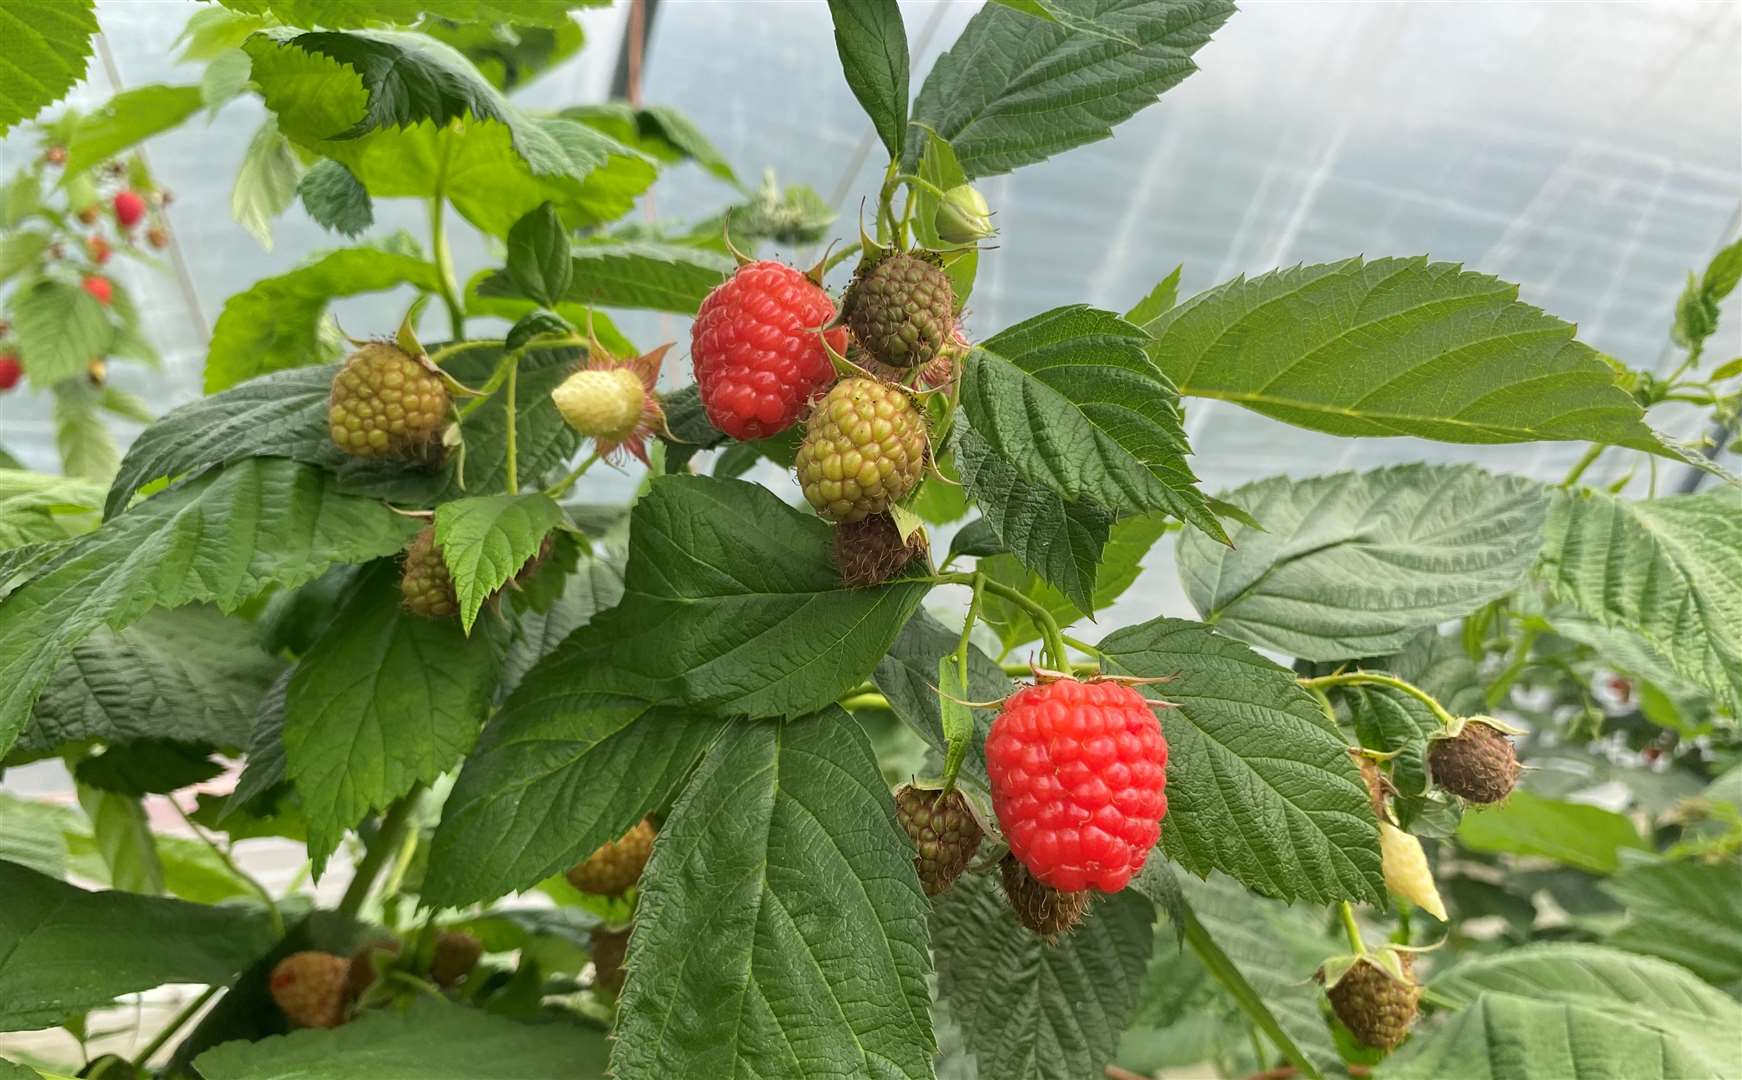 Raspberries like these will be picked and packed to be sent to supermarkets